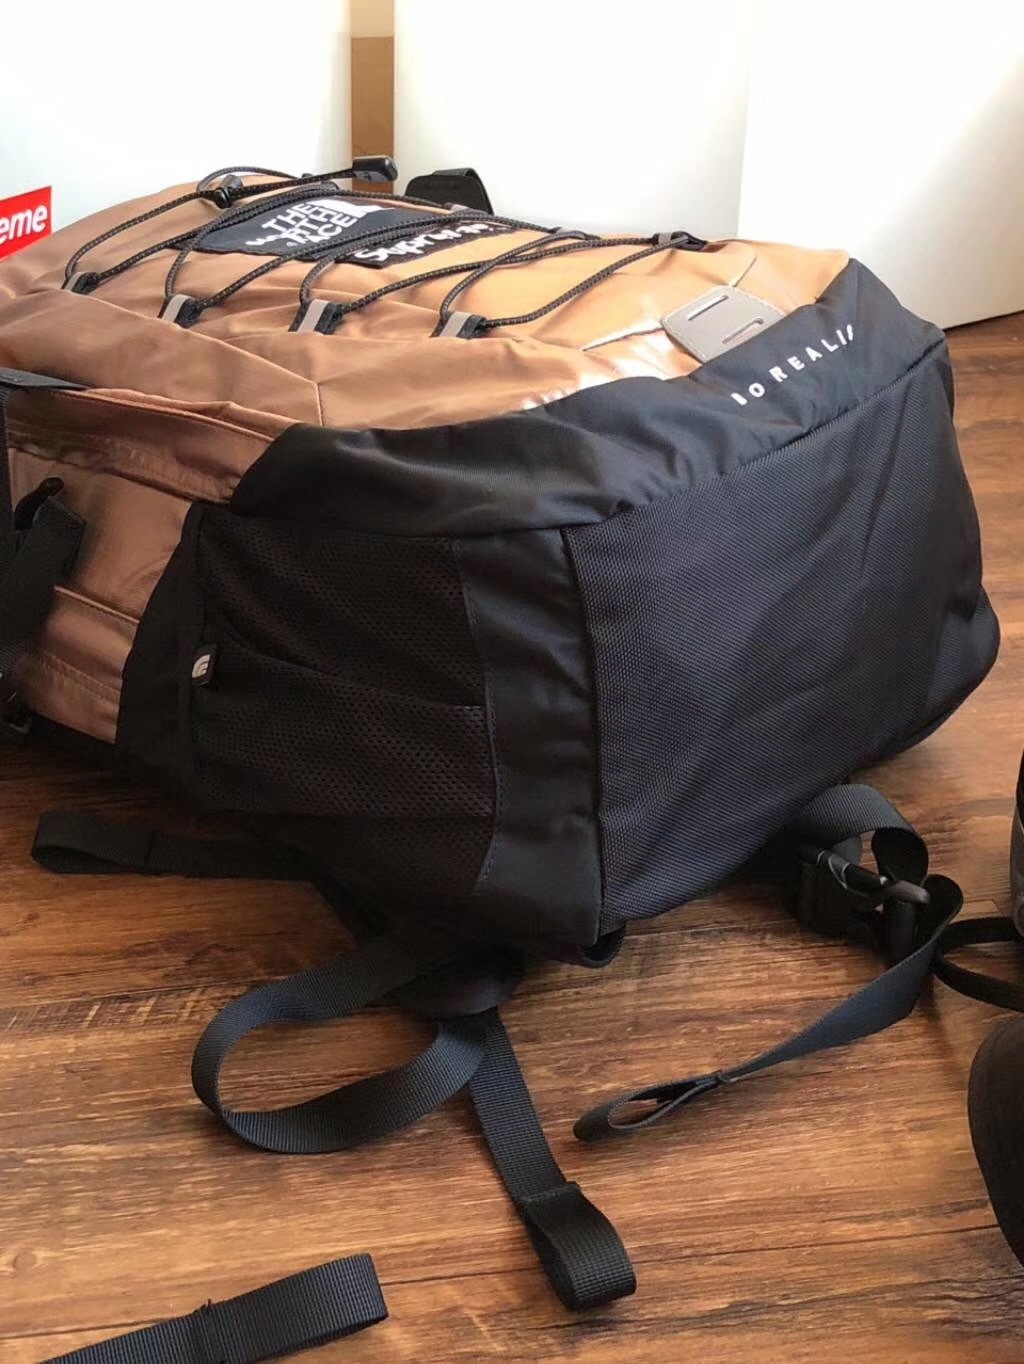 Supreme X TNF 18SS Metallic Backpack SP0230 – Sally House of Fashion | Buy Your Latest Fashion Today